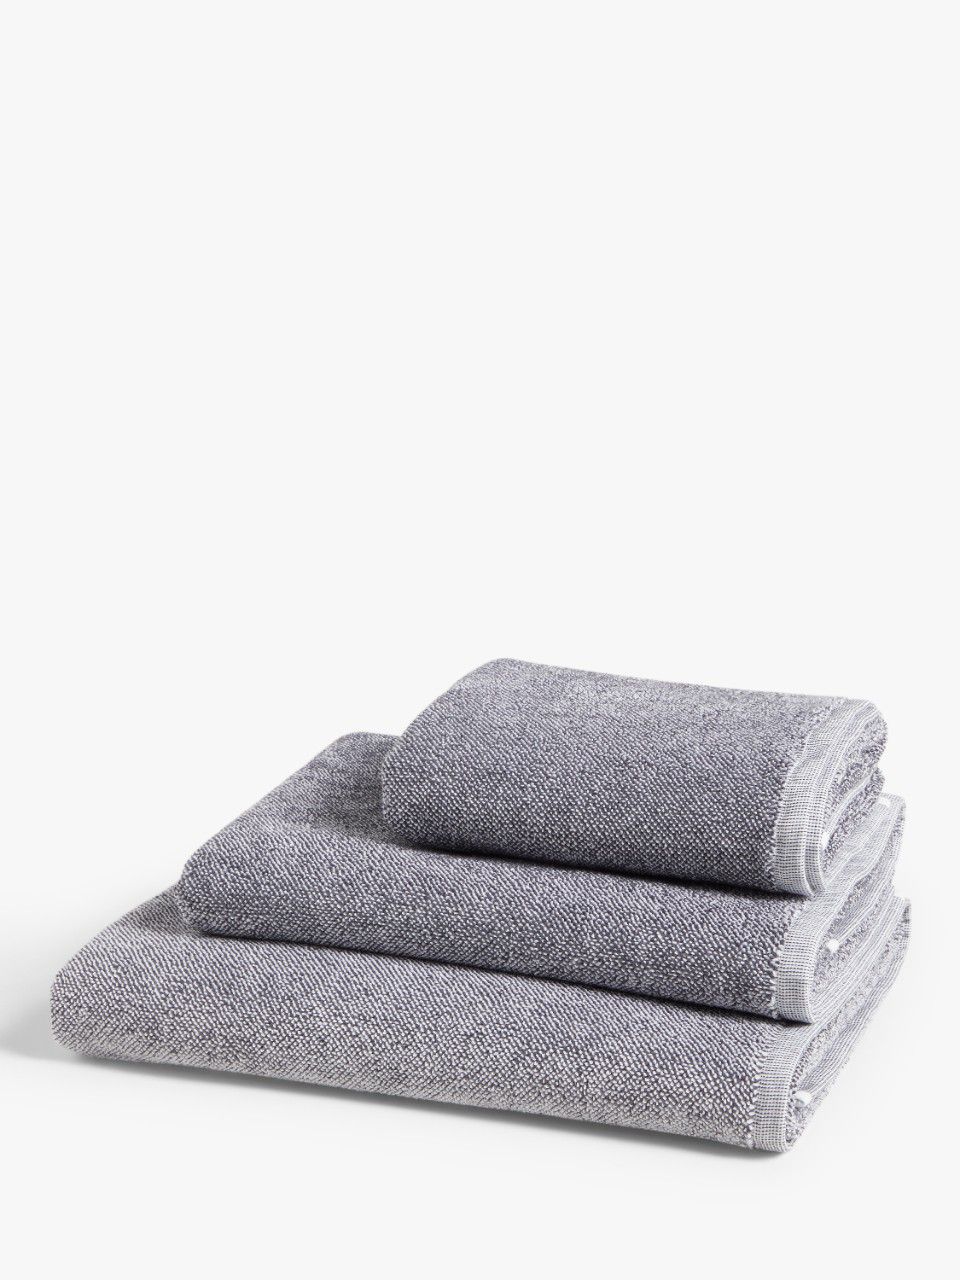 John Lewis ANYDAY Semi Plain Cotton Towel with Hanging Loop